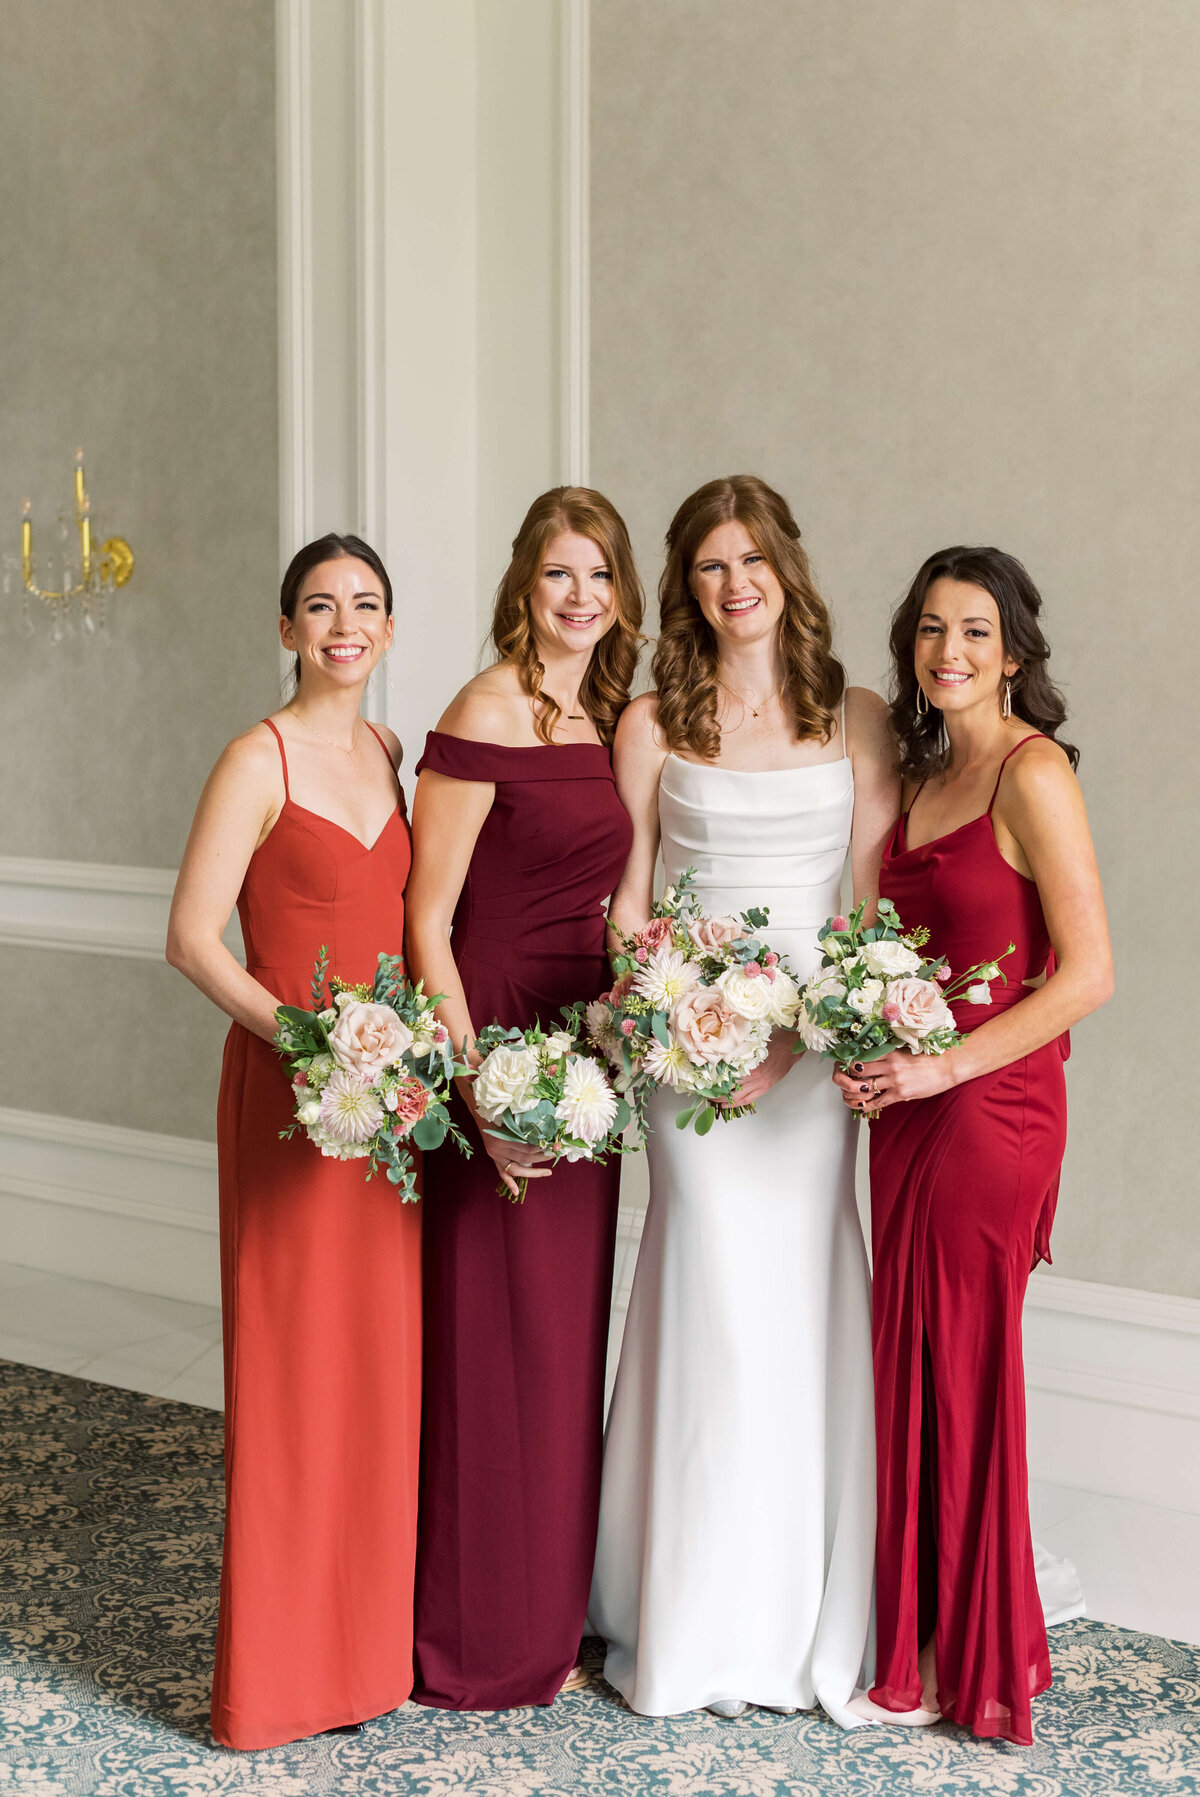 Bride with 3 bridesmaids wearing red dresses at Lord Nelson Hotel, Nova Scotia